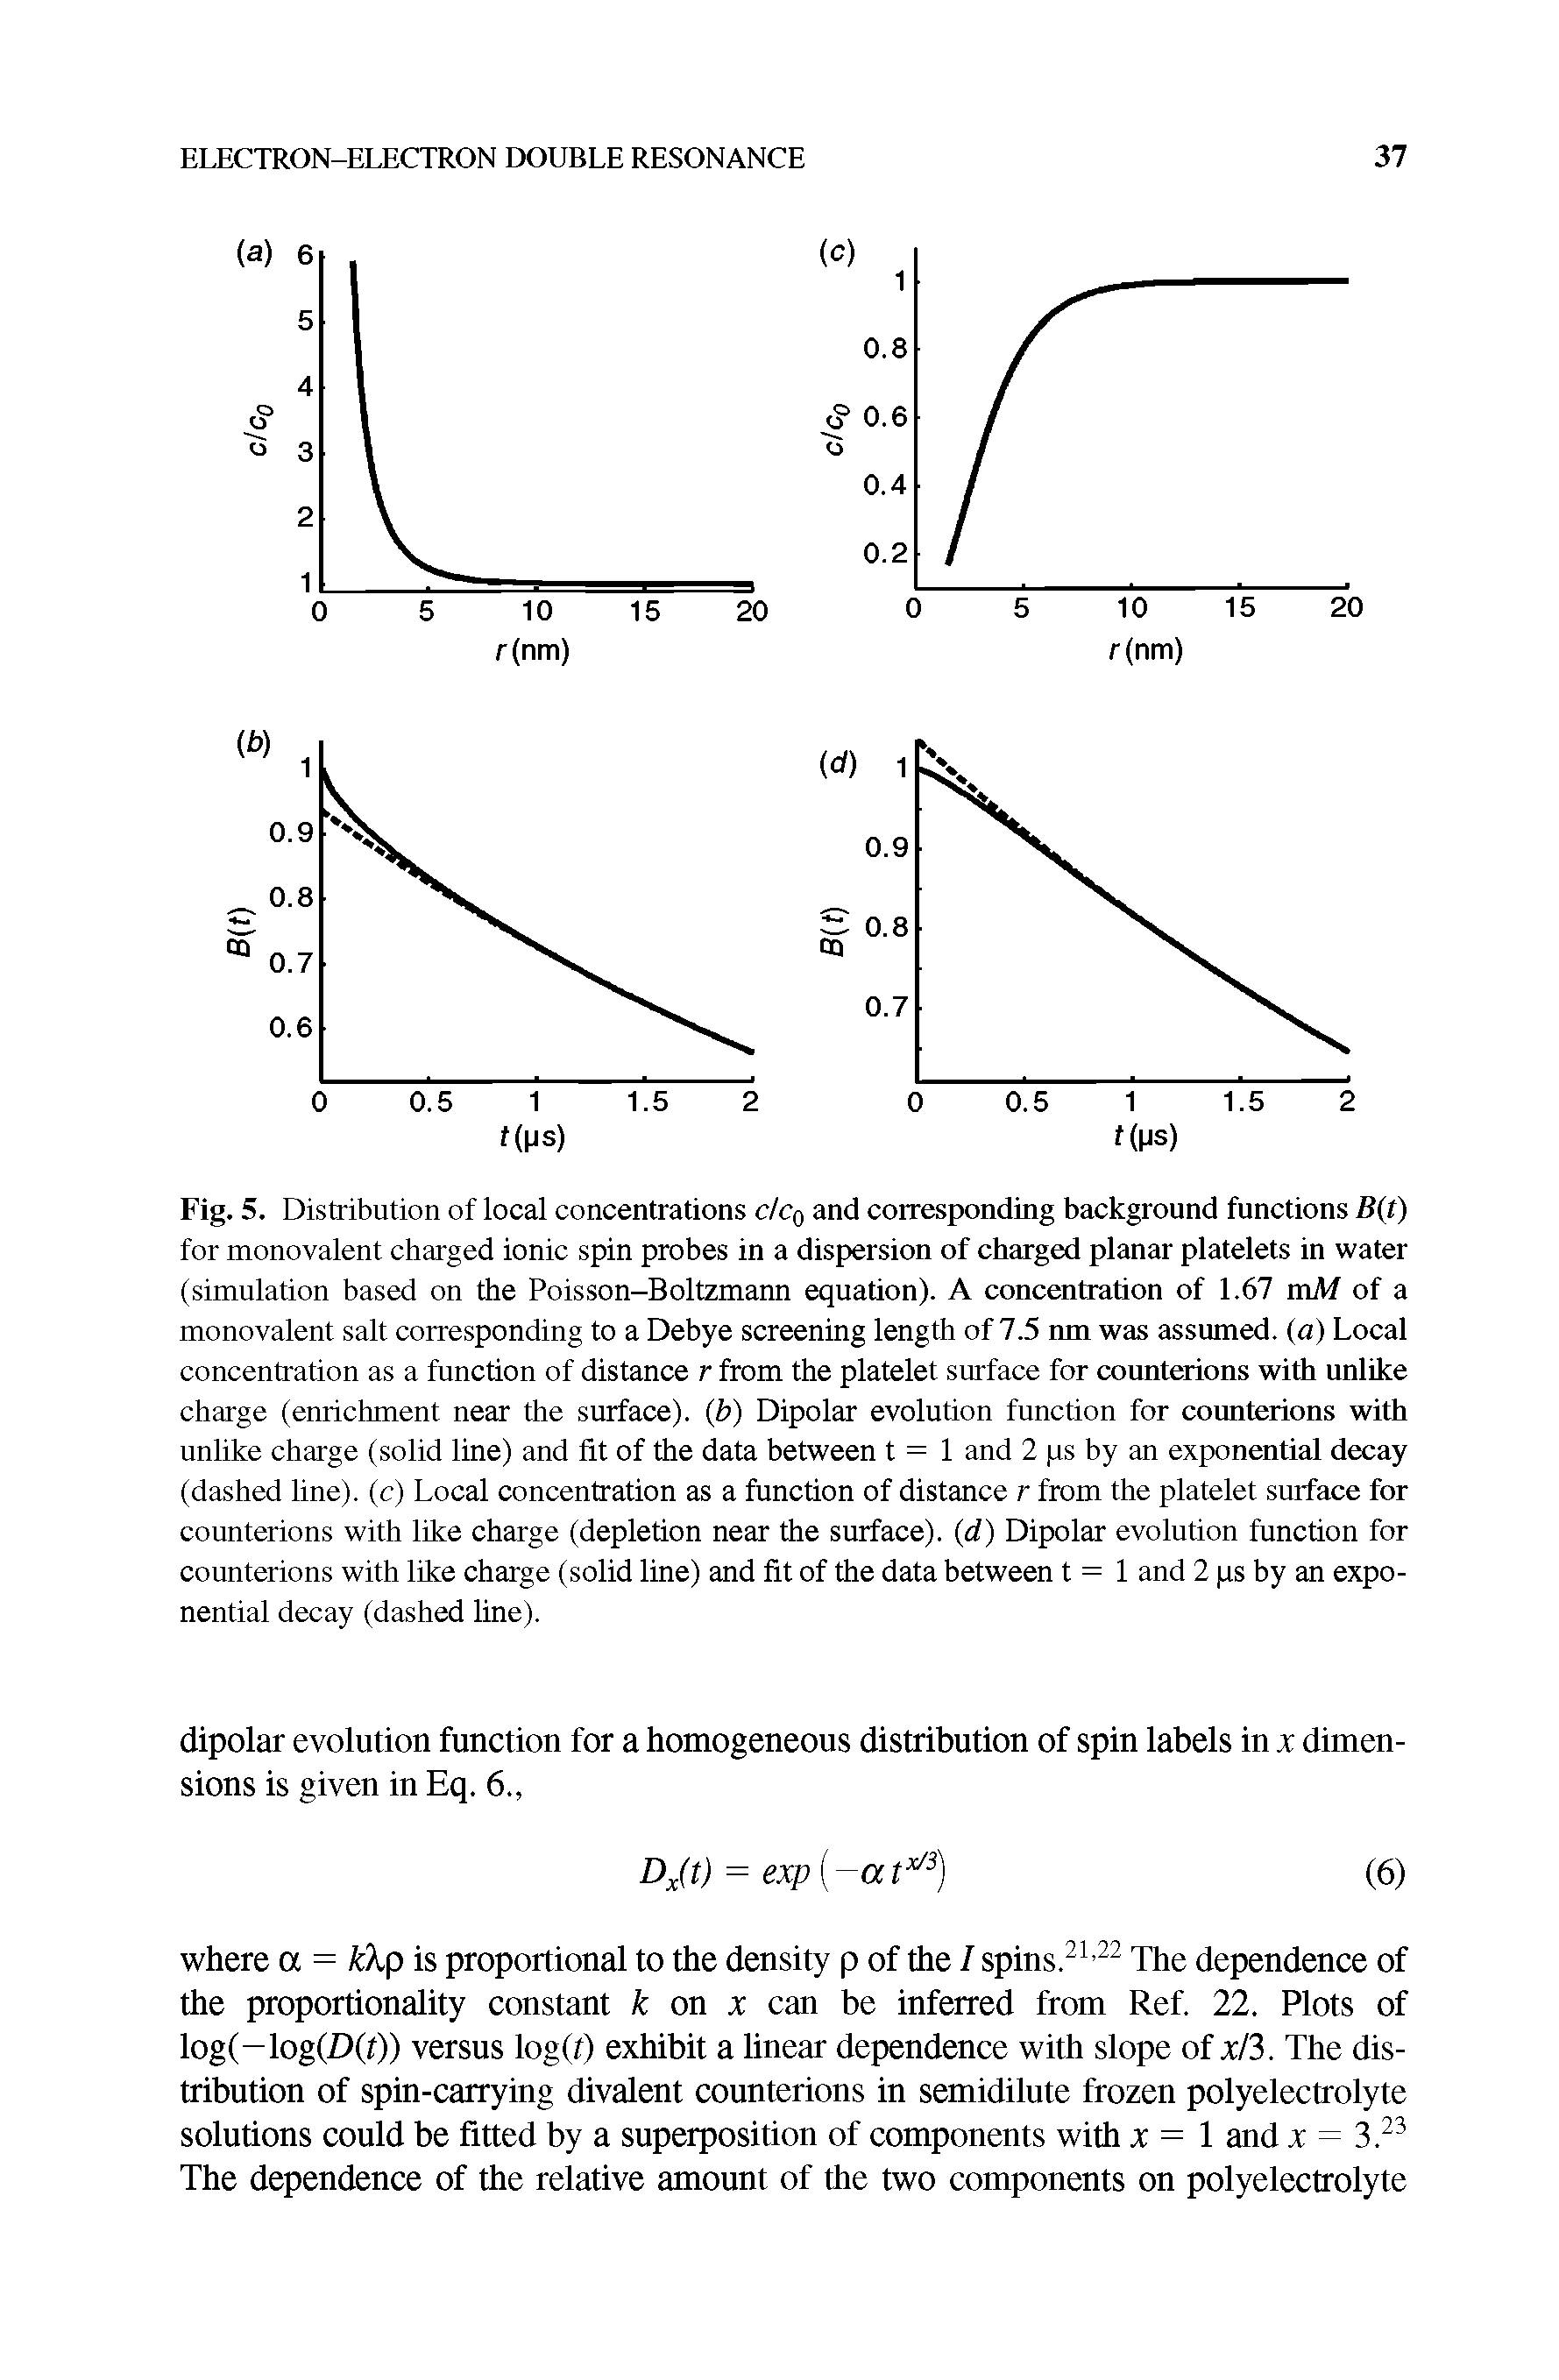 Fig. 5. Distribution of local concentrations c/cq and corresponding background functions B(t) for monovalent charged ionic spin probes in a dispersion of charged planar platelets in water (simulation based on the Poisson-Boltzmann equation). A concentration of 1.67 mM of a monovalent salt corresponding to a Debye screening length of 7.5 nm was assumed, (a) Local concentration as a function of distance r from the platelet surface for counterions with unlike charge (enrichment near the surface), (b) Dipolar evolution function for counterions with unlike charge (solid line) and fit of the data between t = 1 and 2 ps by an exponential decay (dashed line), (c) Local concentration as a function of distance r from the platelet surface for counterions with like charge (depletion near the surface), (d) Dipolar evolution function for counterions with like charge (solid line) and fit of the data between t = 1 and 2 ps by an exponential decay (dashed line).